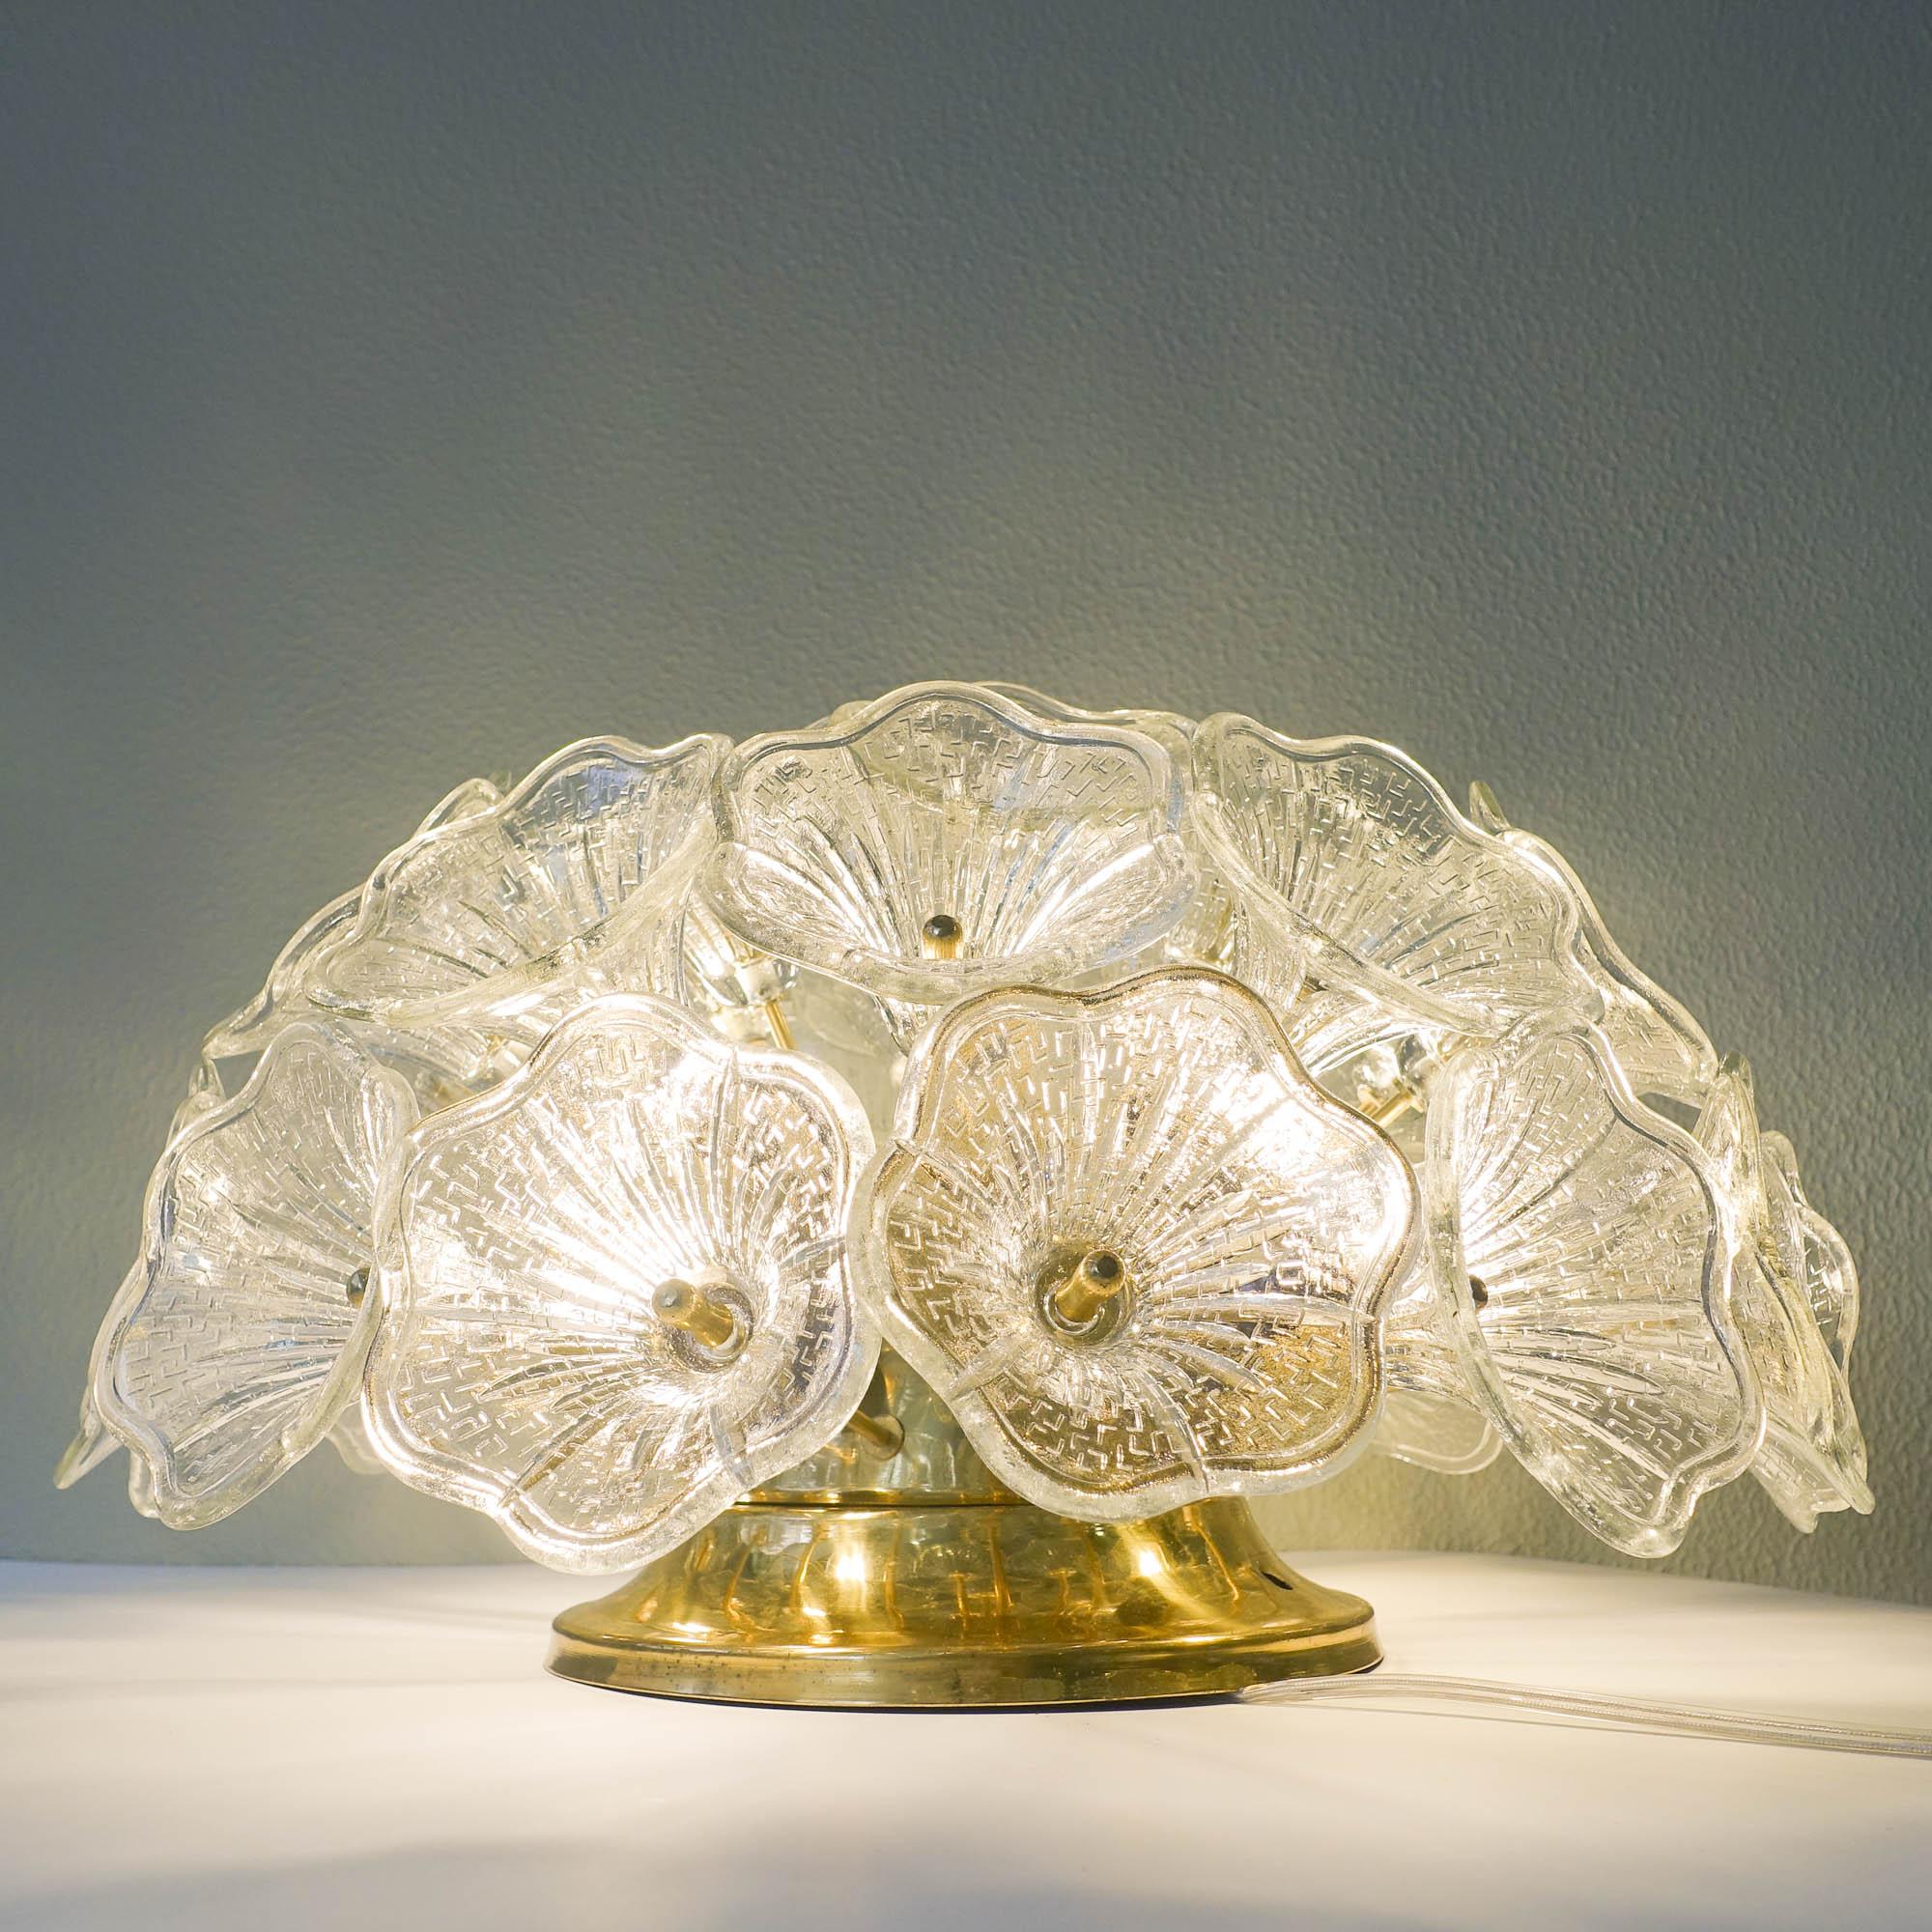 Mid-Century Modern Flowerball Sputnik Ceiling/ Sconce by Paolo Venini for VeArt, 1960's